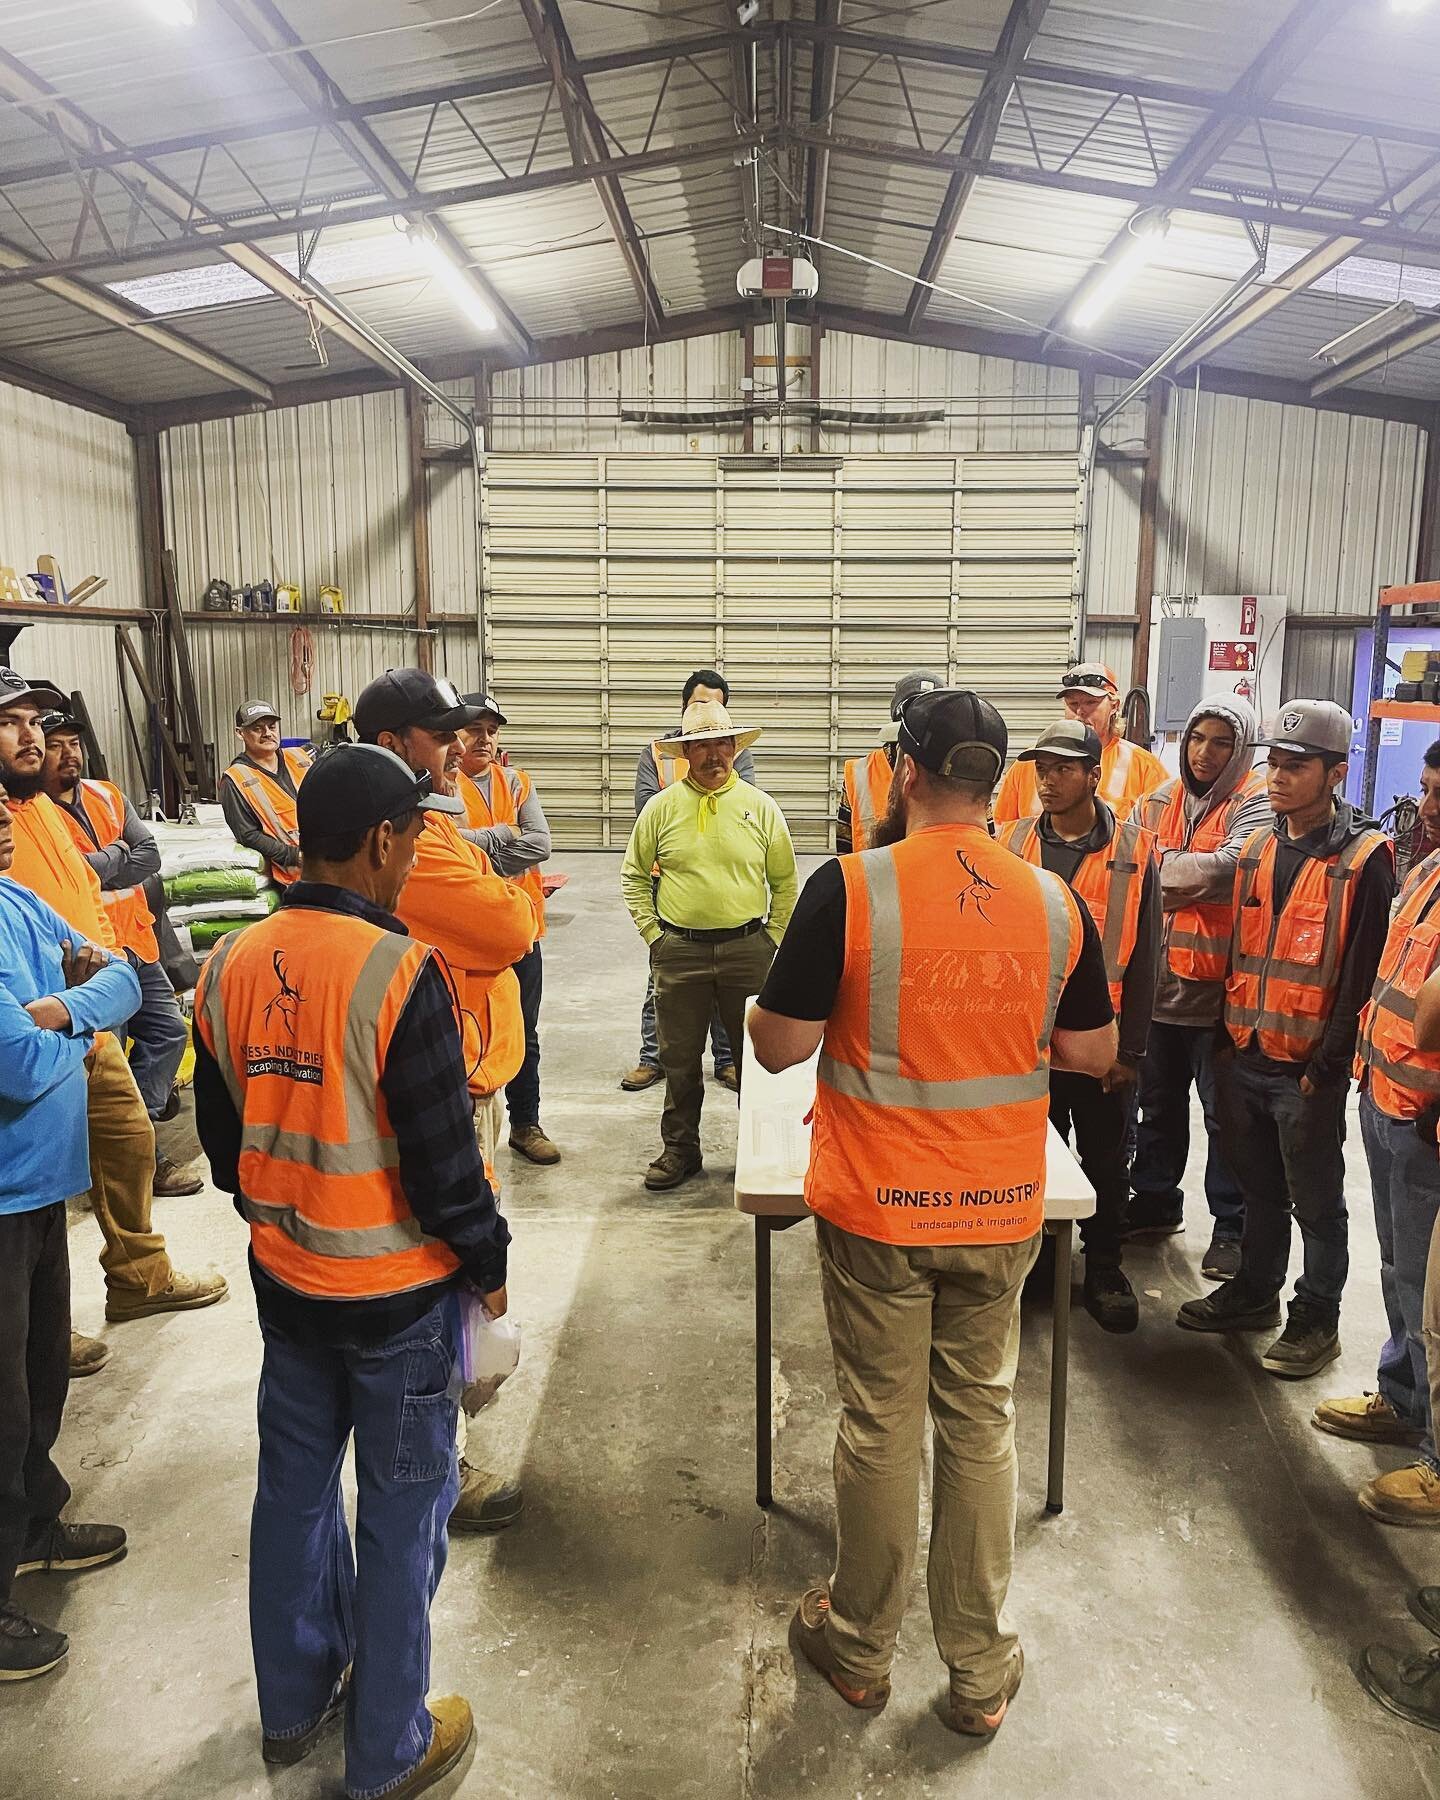 Safety week in full effect here! We truly take safety seriously here at Urness. Preventing injury is a top priority and every year, we gather for a week in the mornings to refresh everyone&rsquo;s understanding and implementation of safety procedures